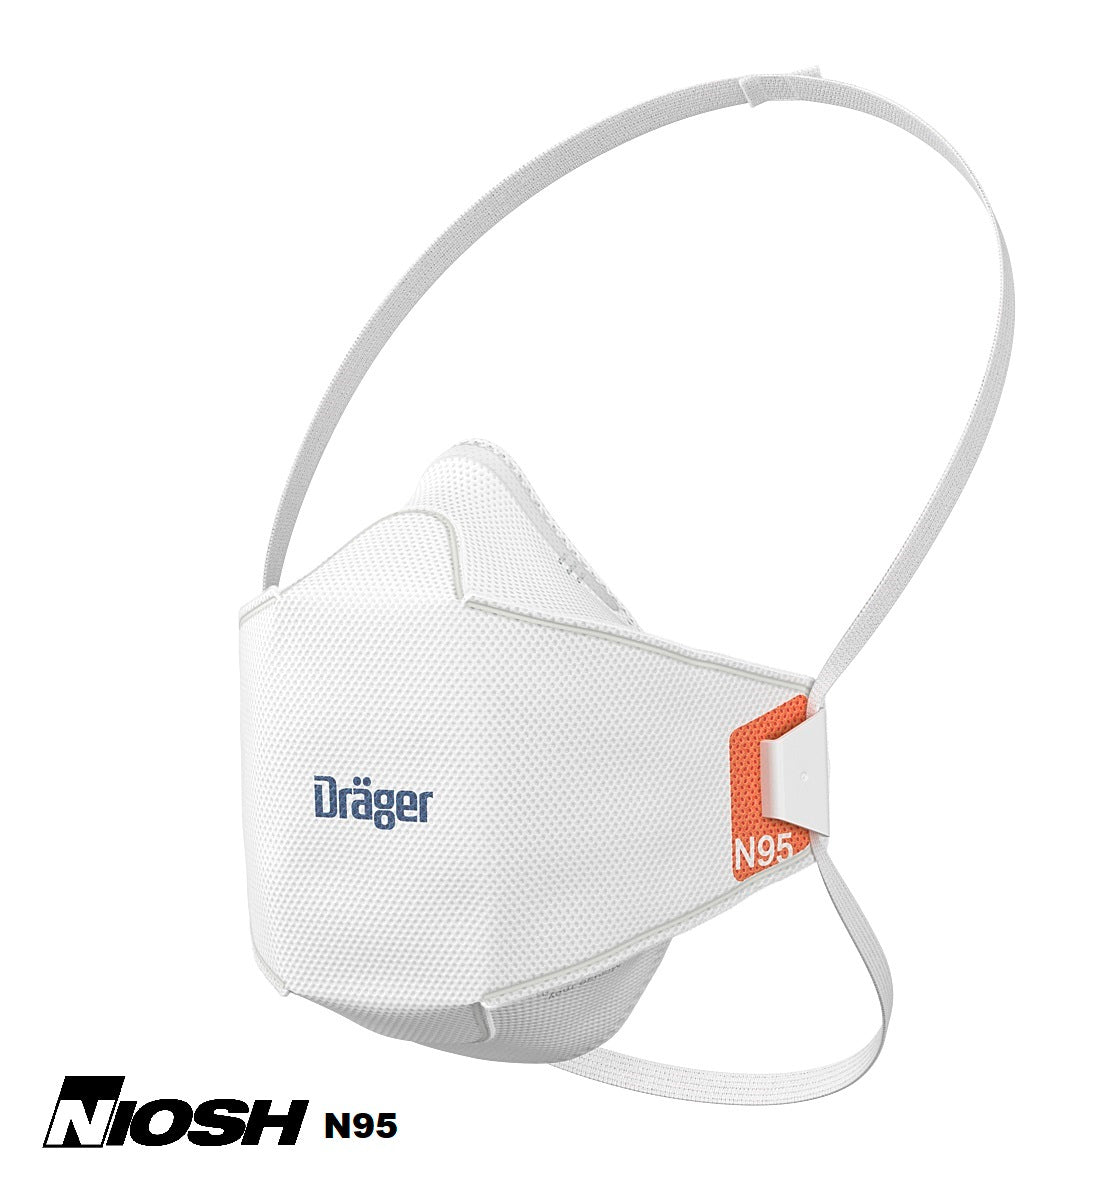 Draeger NIOSH N95 X-Plore 1950 respirator mask front view made in Sweden